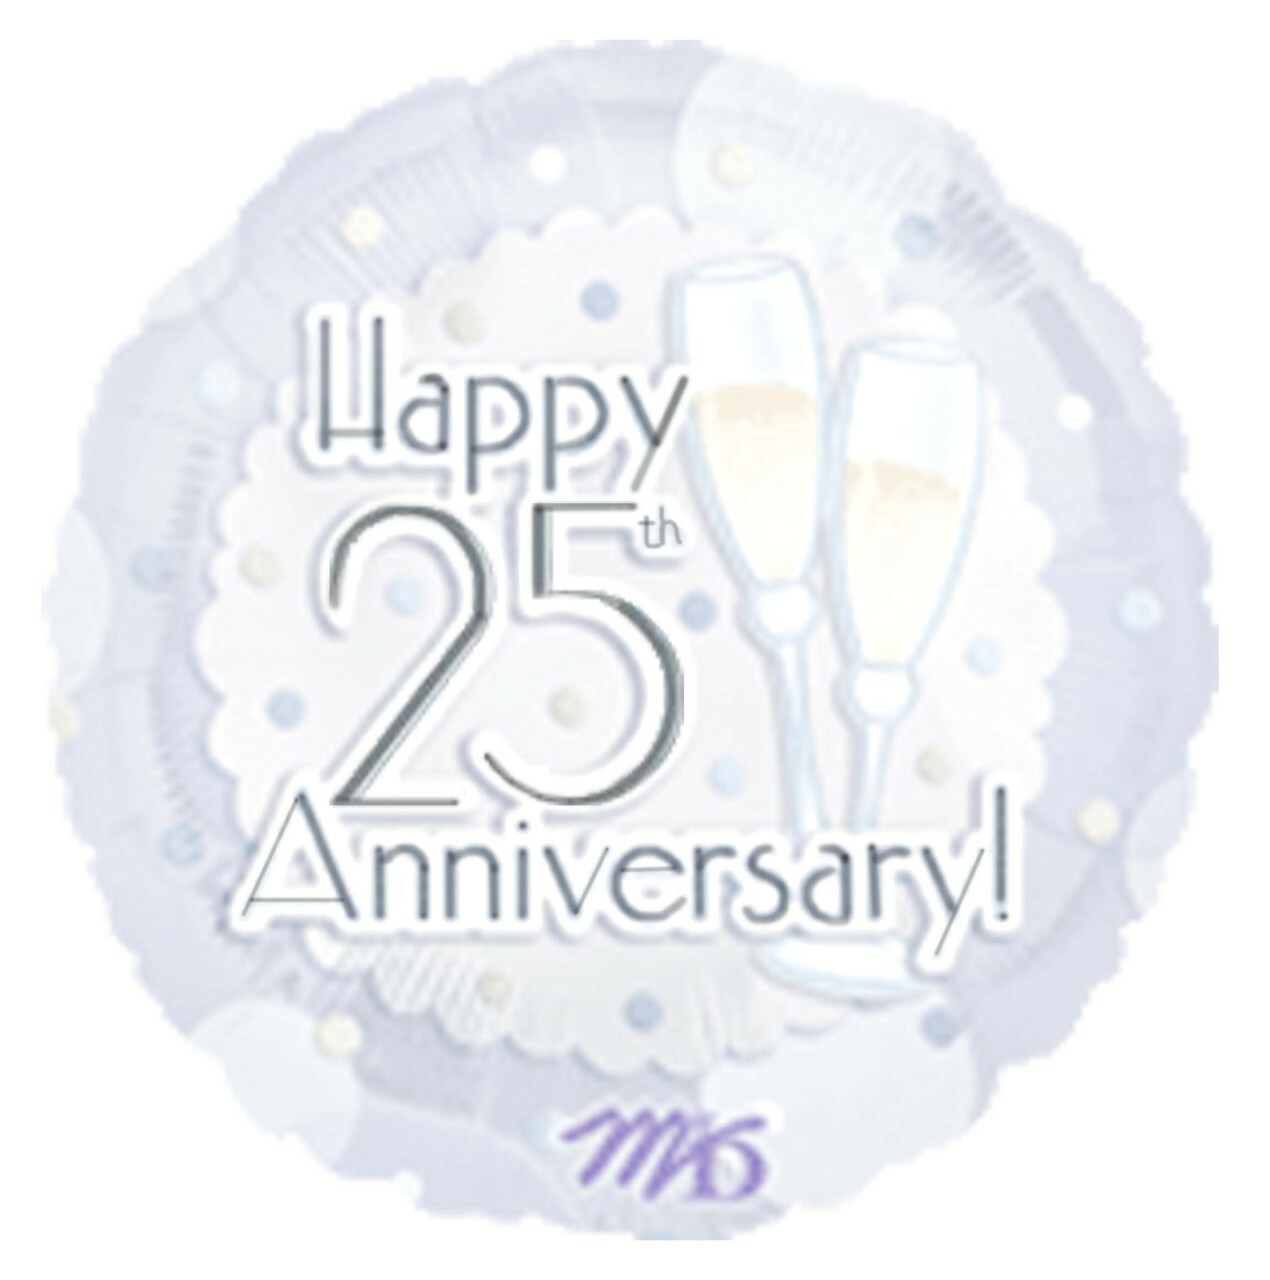 Happy 25th Anniversary Toast M & M Balloon Co. of Seattle